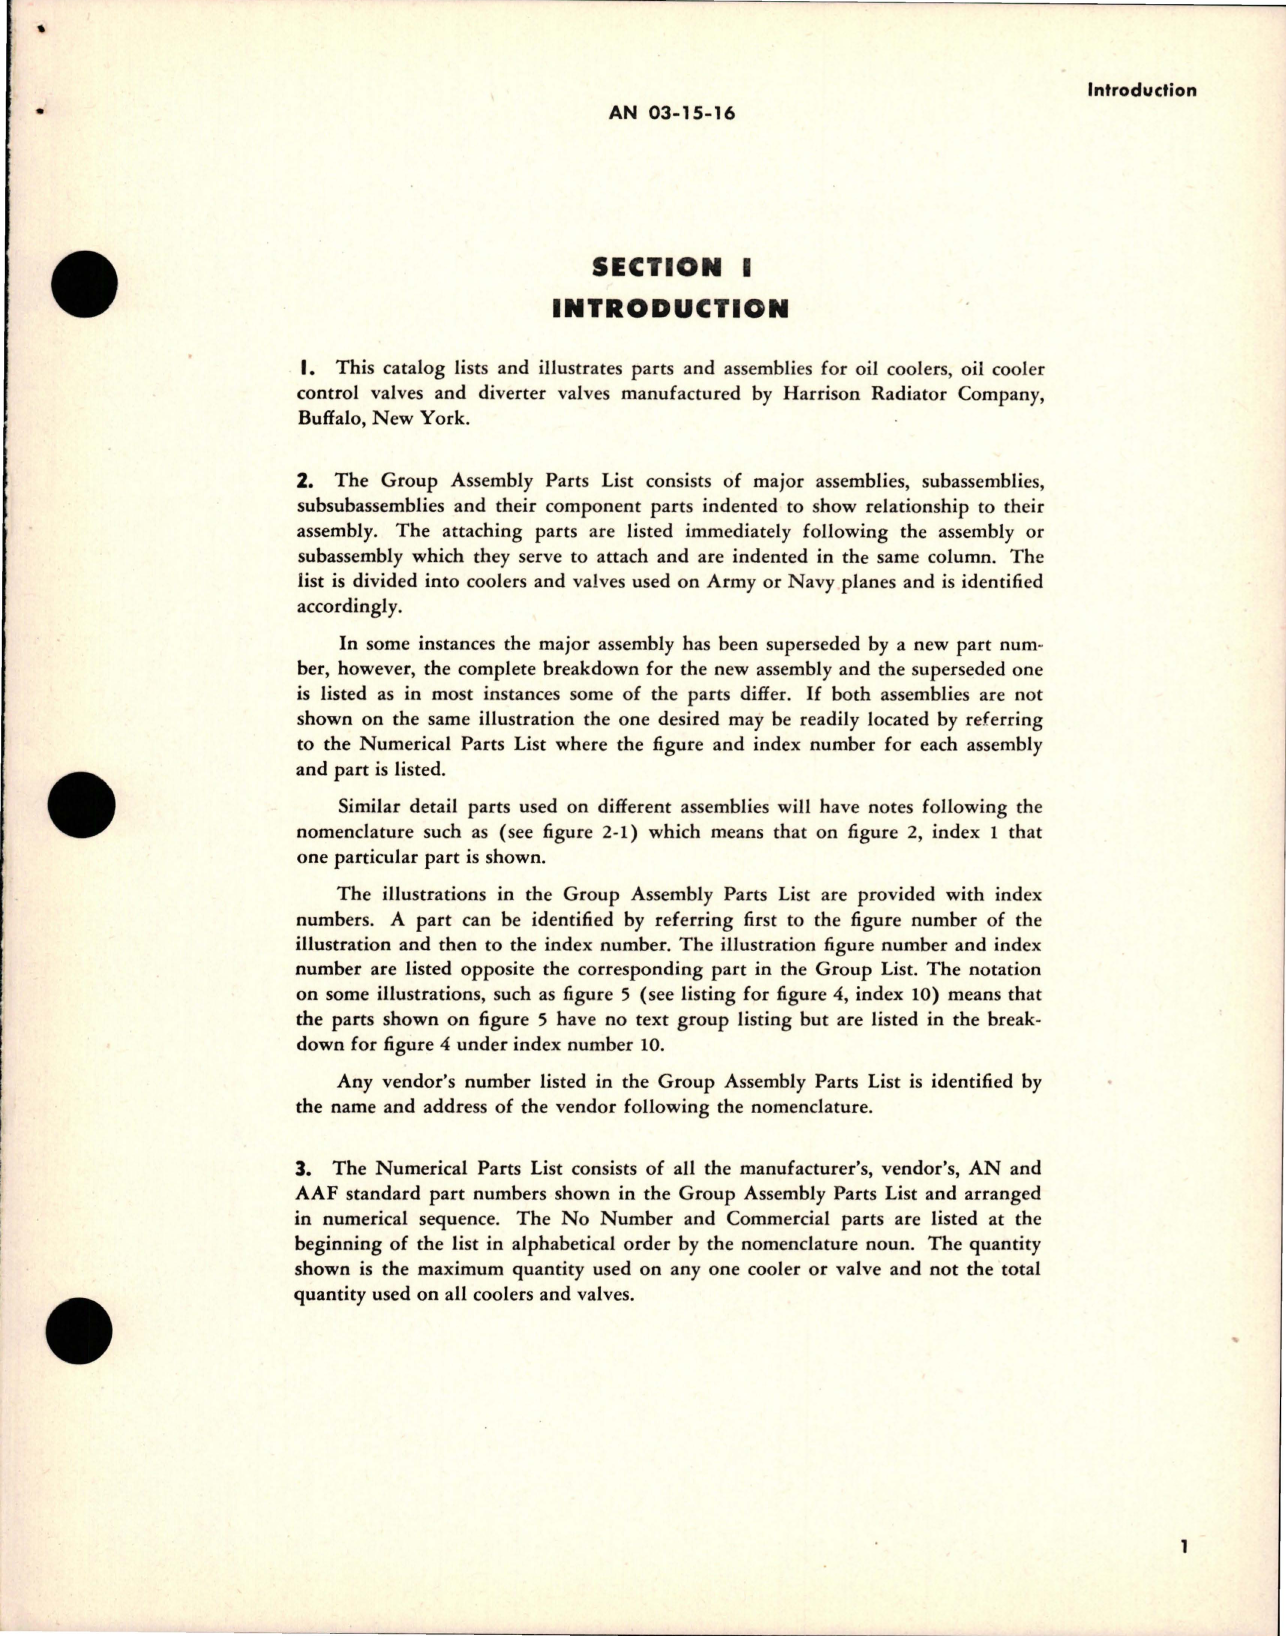 Sample page 5 from AirCorps Library document: Parts Catalog for Oil Coolers & Control Valves 